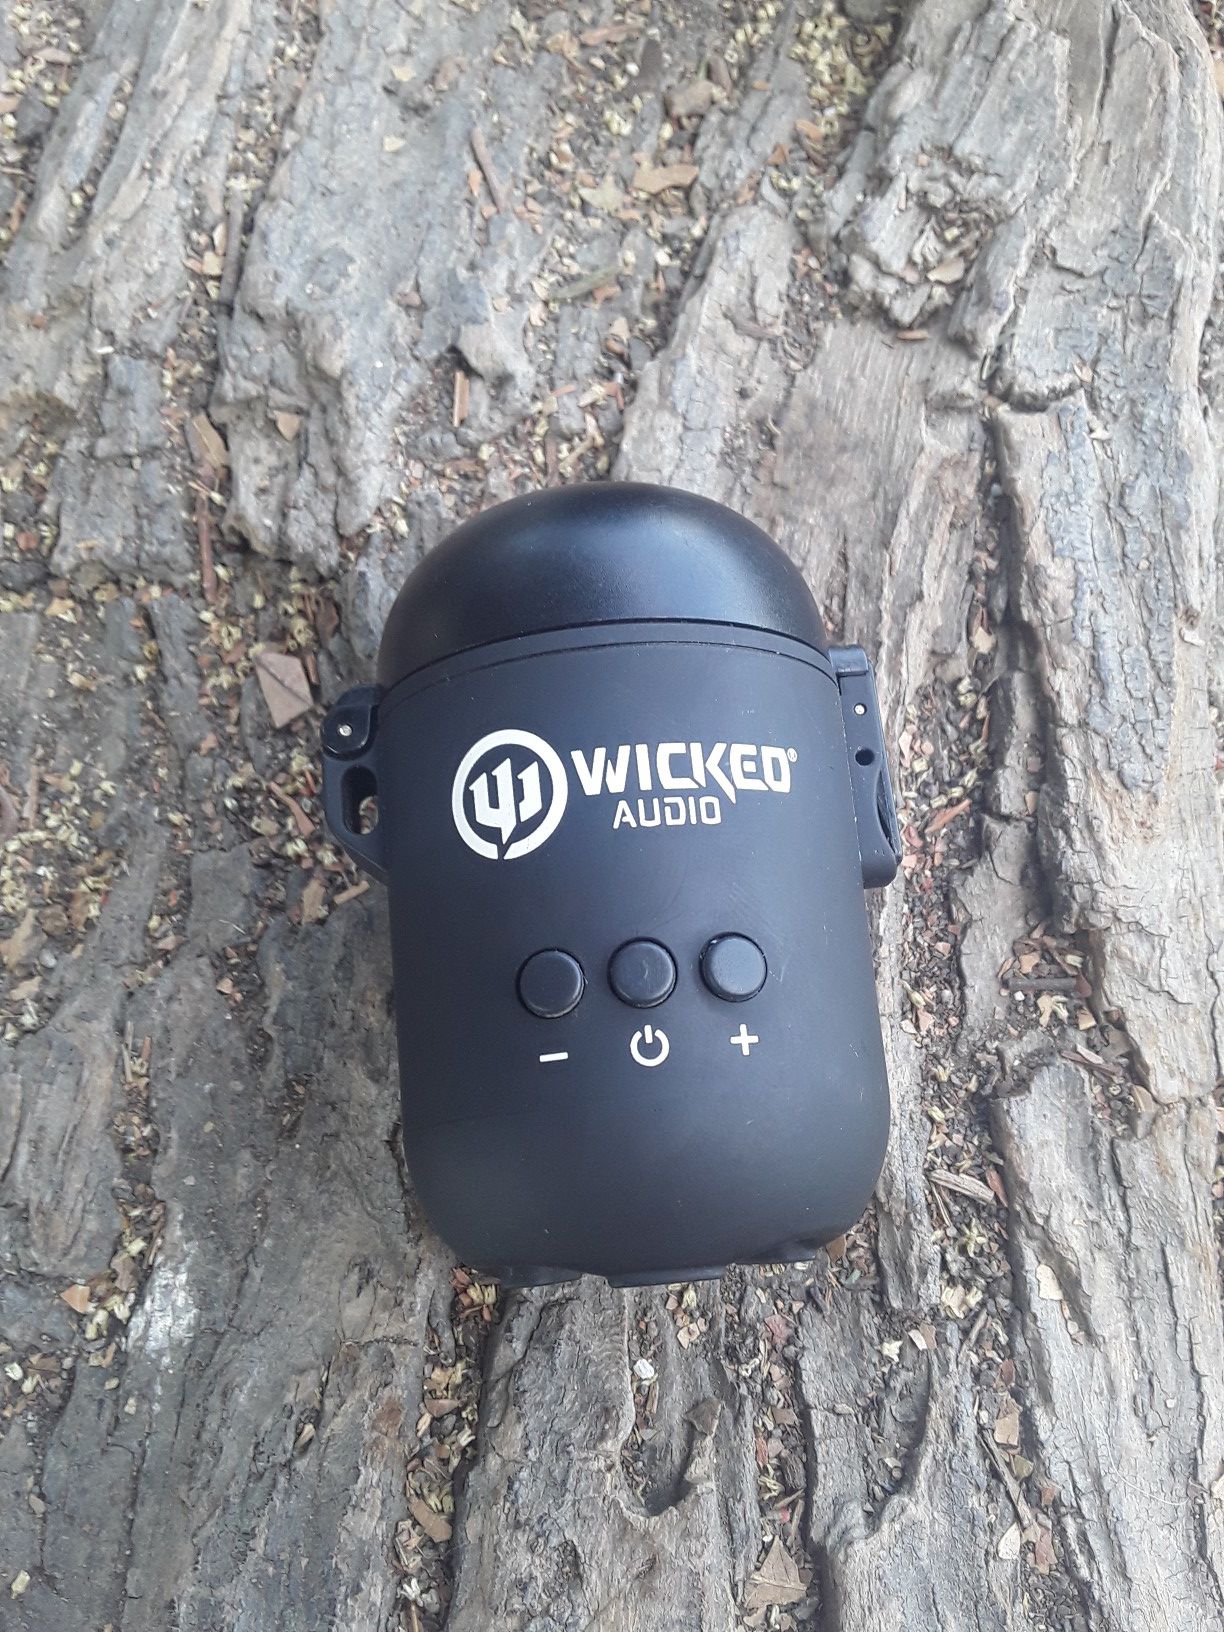 Wicked audio wireless earbuds and speaker